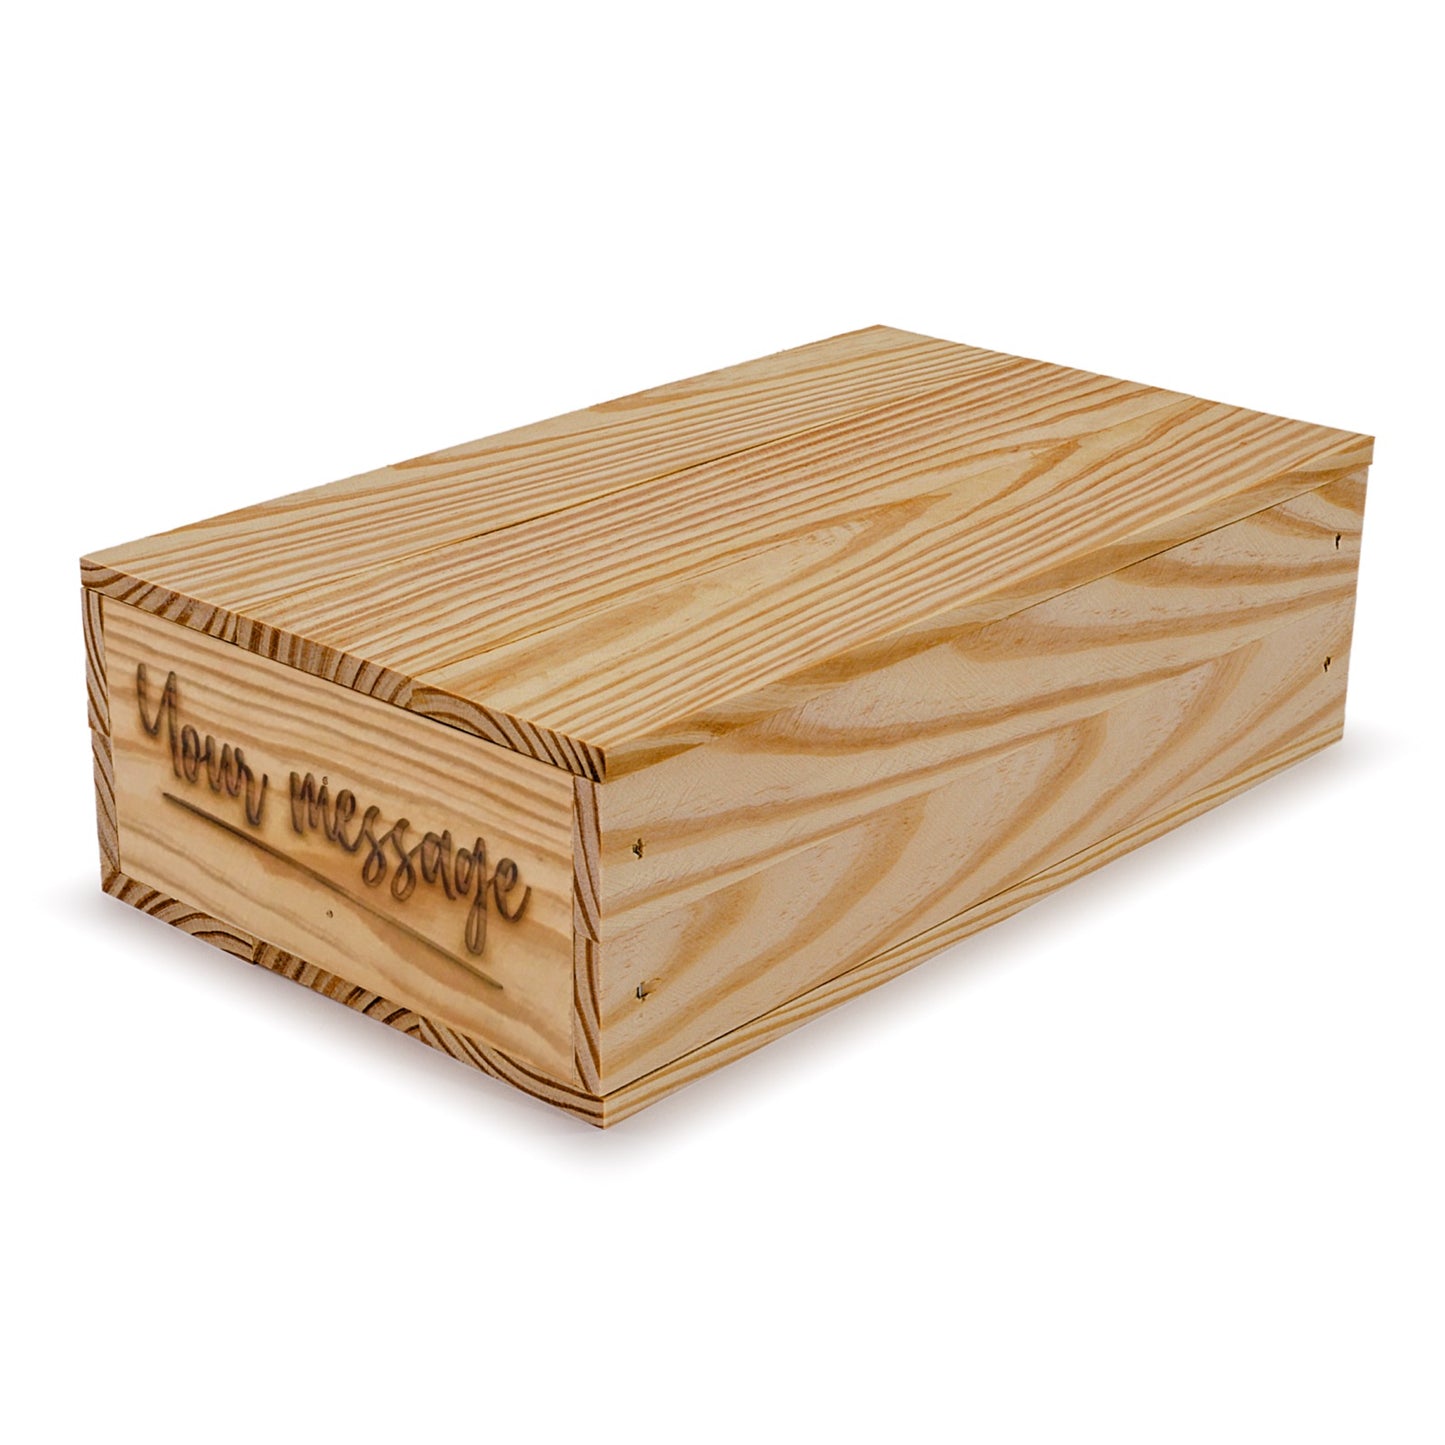 2 Bottle wine crate with lid and custom message 13x7.5x3.5, 6-WB-13-7.5-3.5-ST-NW-LL, 12-WB-13-7.5-3.5-ST-NW-LL, 24-WB-13-7.5-3.5-ST-NW-LL, 48-WB-13-7.5-3.5-ST-NW-LL, 96-WB-13-7.5-3.5-ST-NW-LL